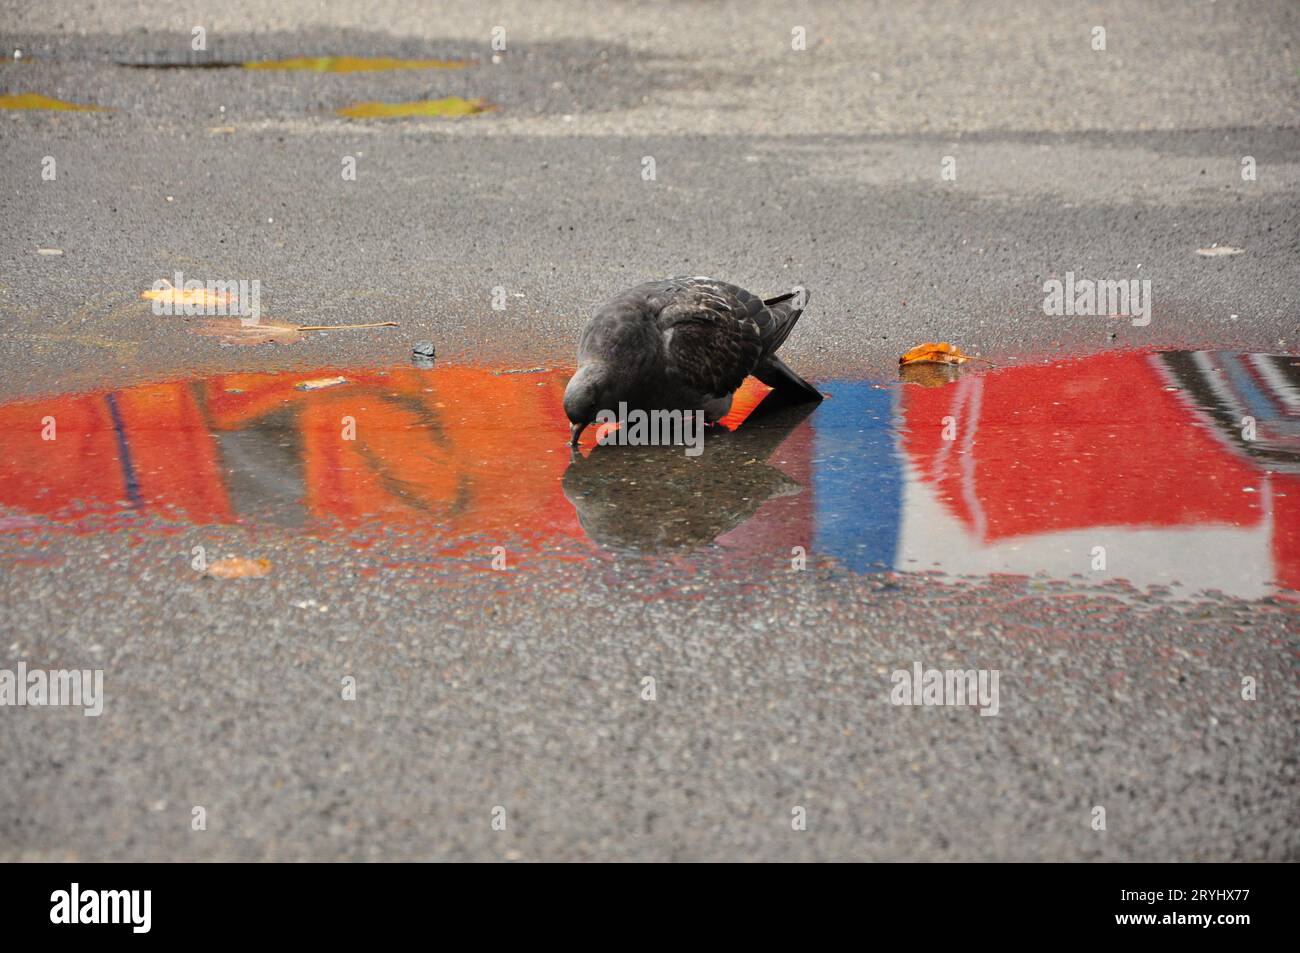 Closeup of a rock dove drinking water from a puddle with graffiti reflection on the street Stock Photo